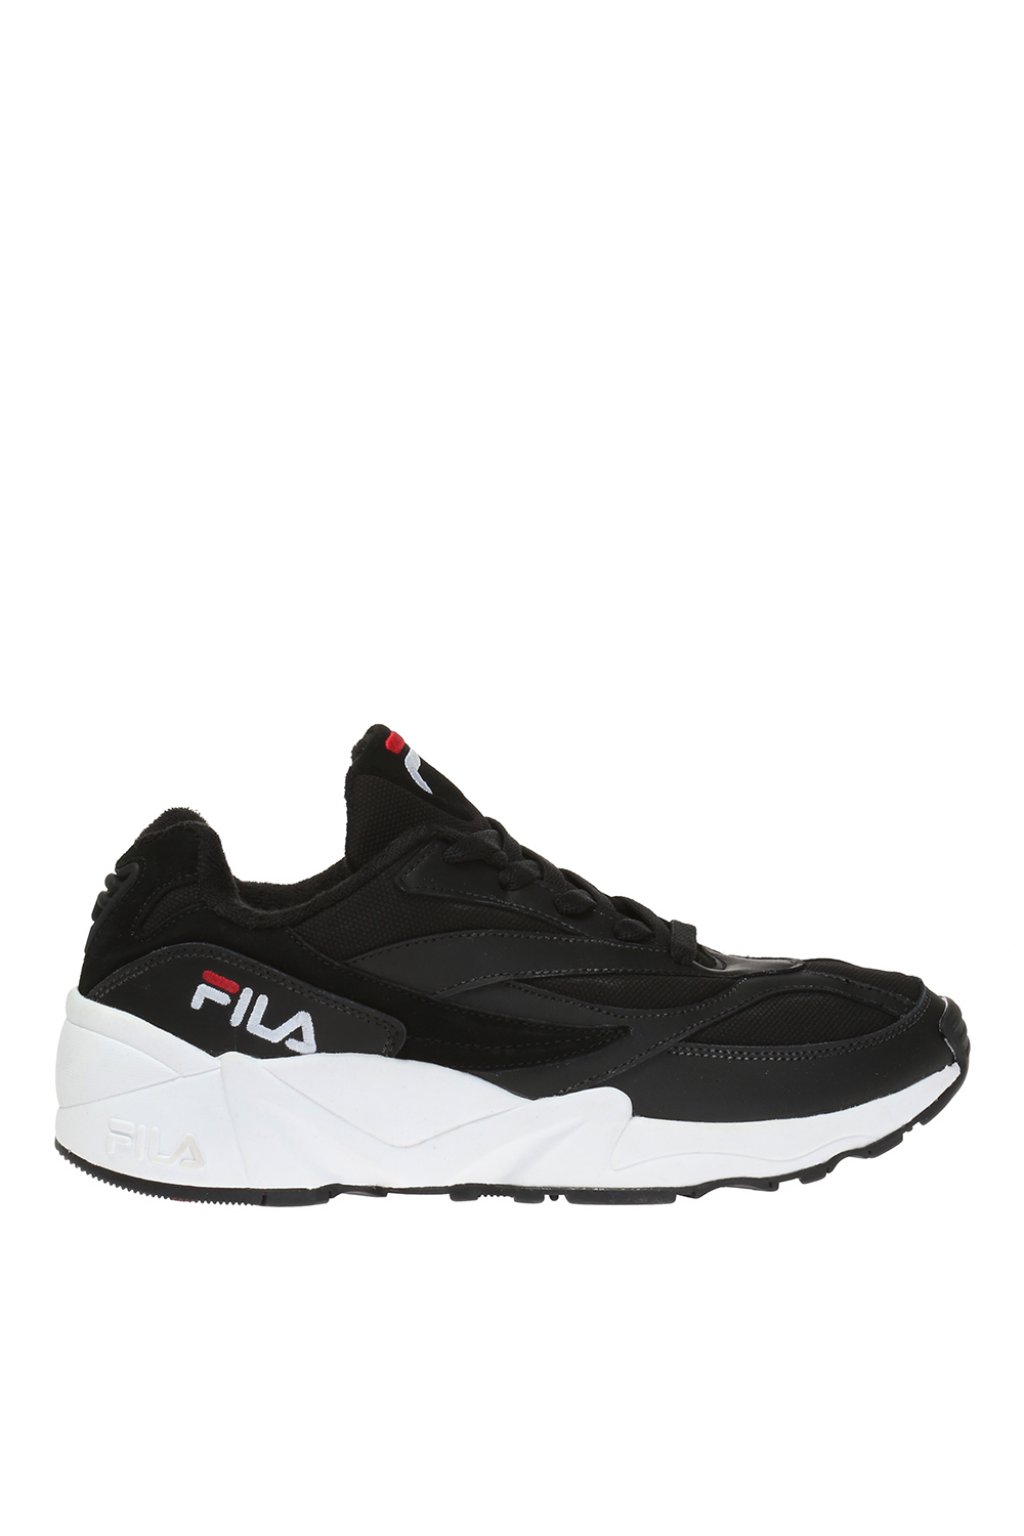 Fila Sport shoes with an embroidered logo, X-wide hiking shoes, Men's  Shoes